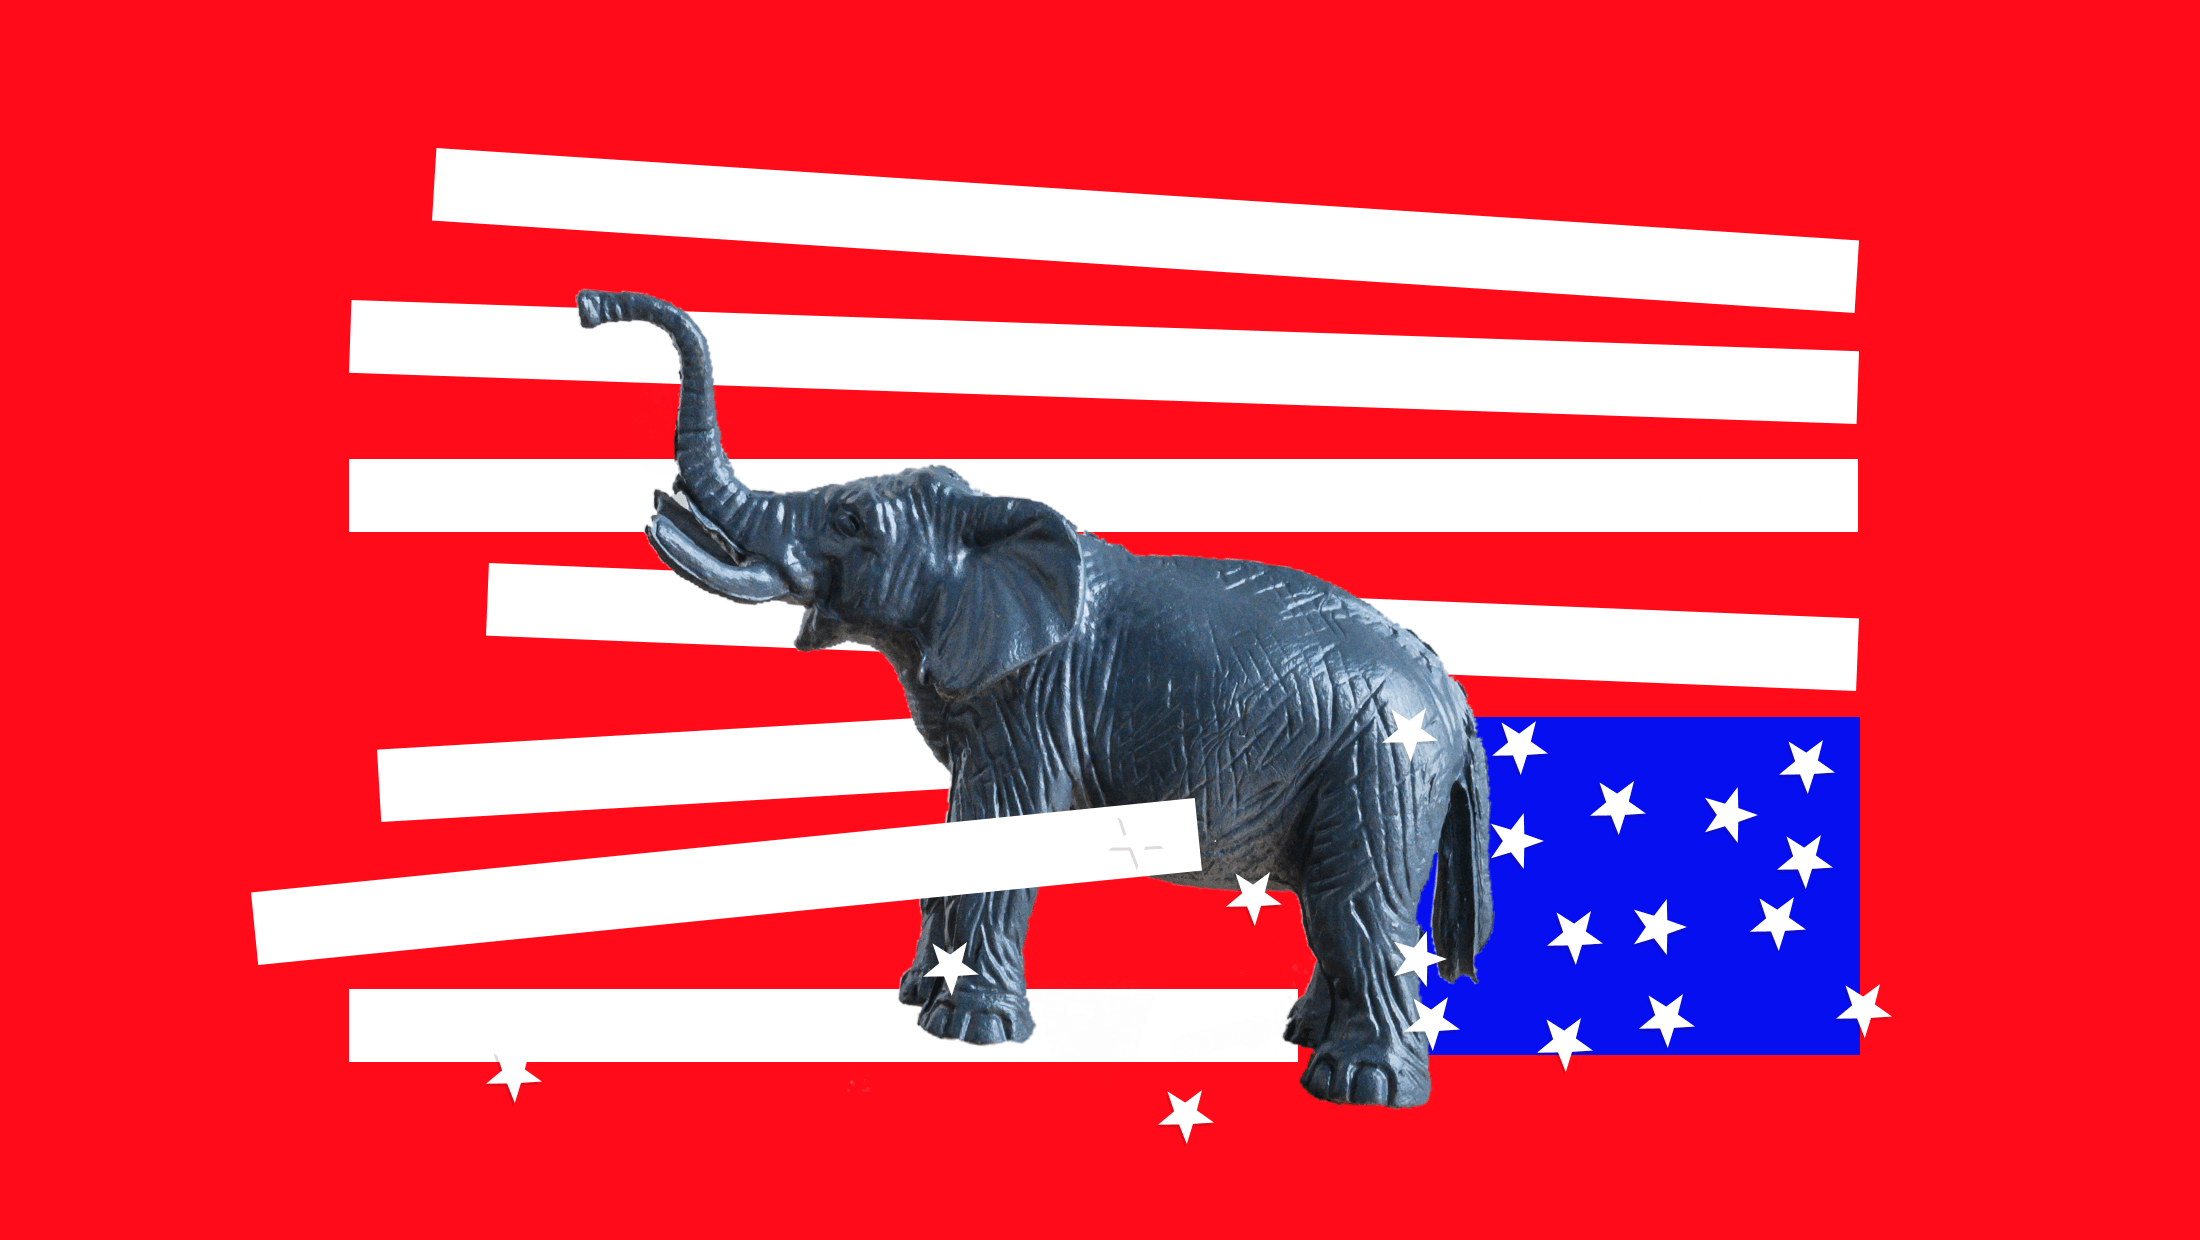 An angry-looking elephant tangled in the stripes of an upside-down American flag